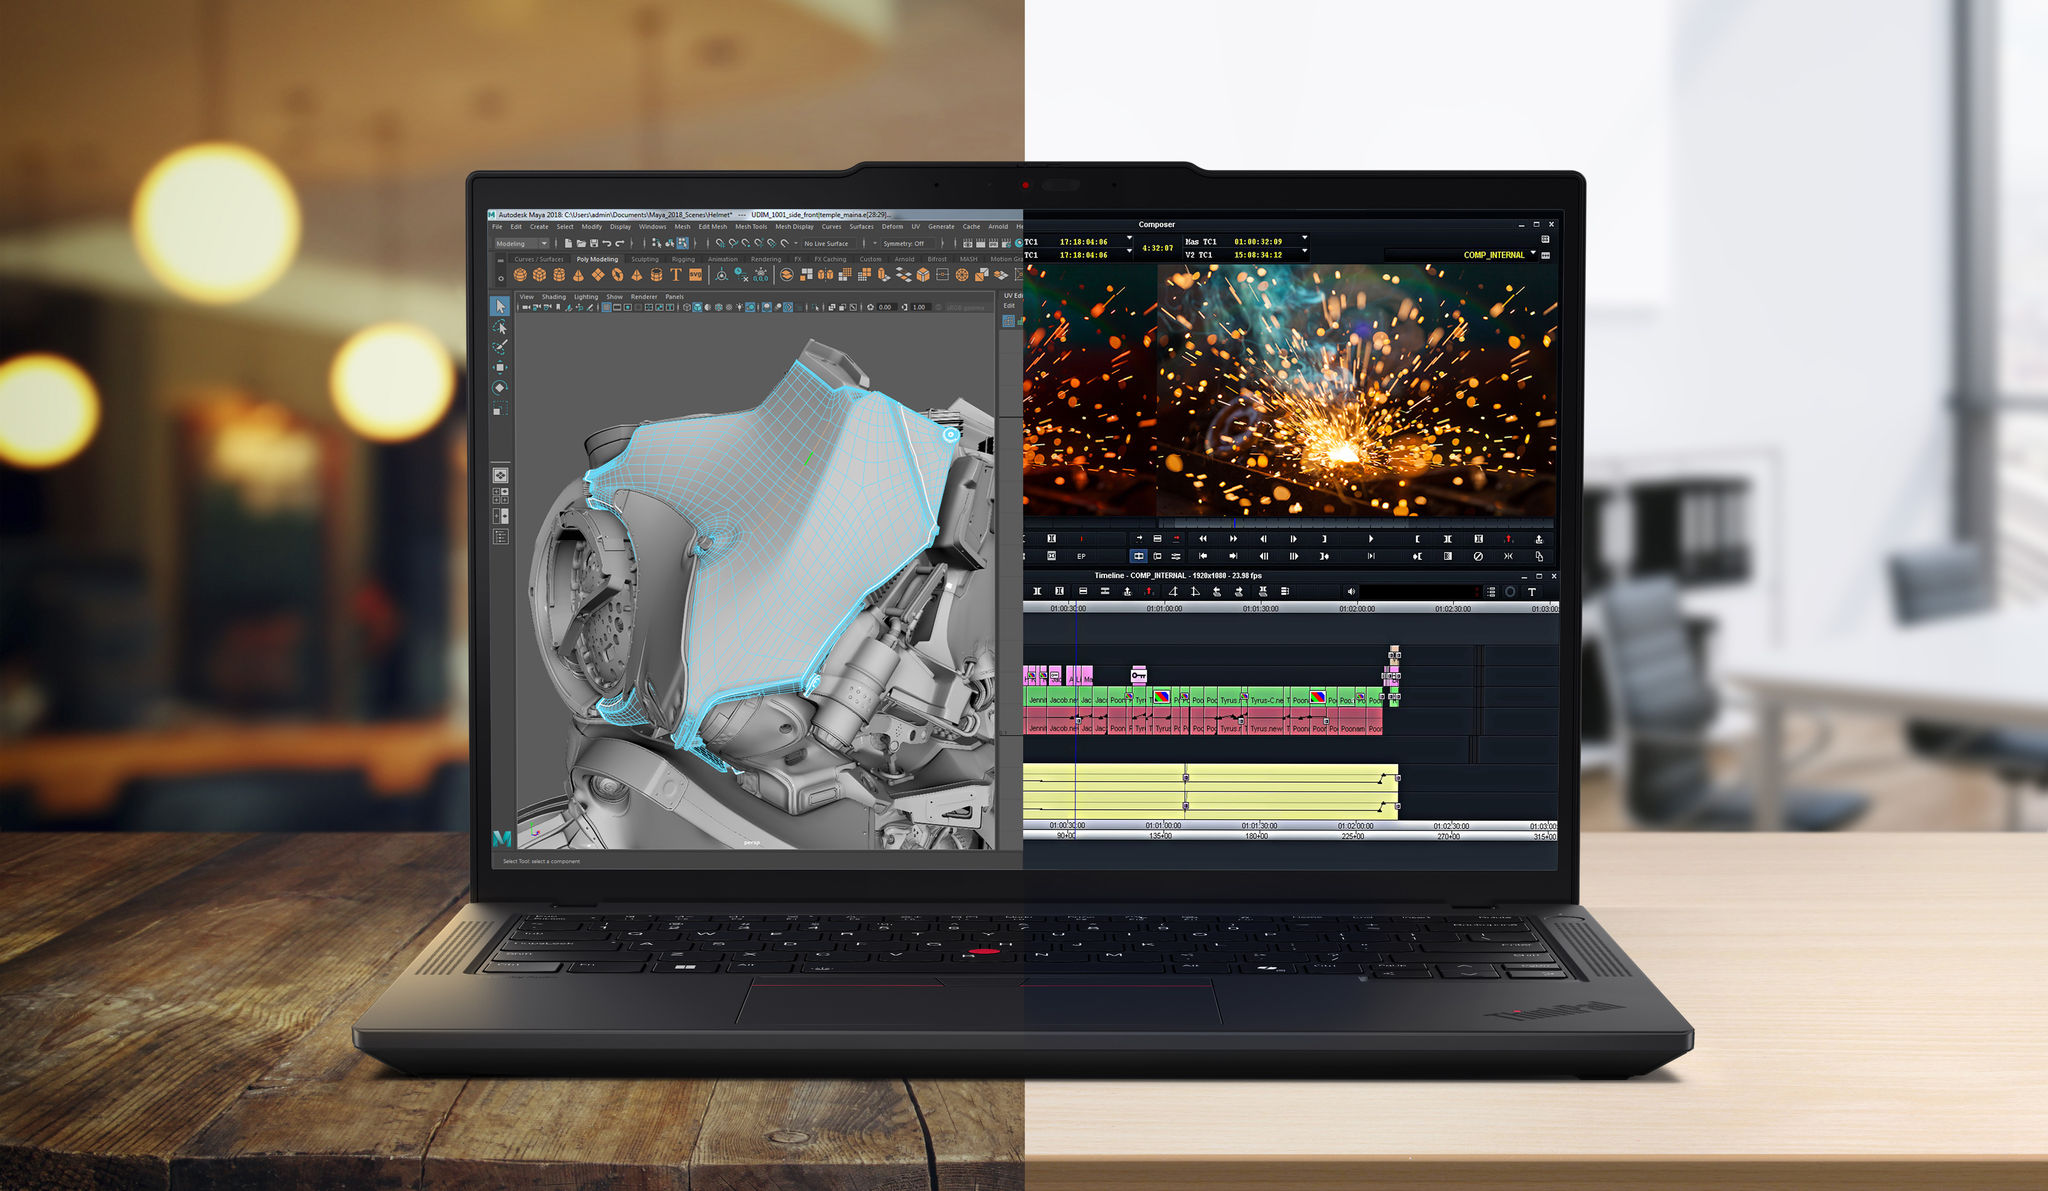  Lenovo Announces Its New AI PC ThinkPad P14s Gen 5 Mobile Workstation Powered by AMD Ryzen PRO ....